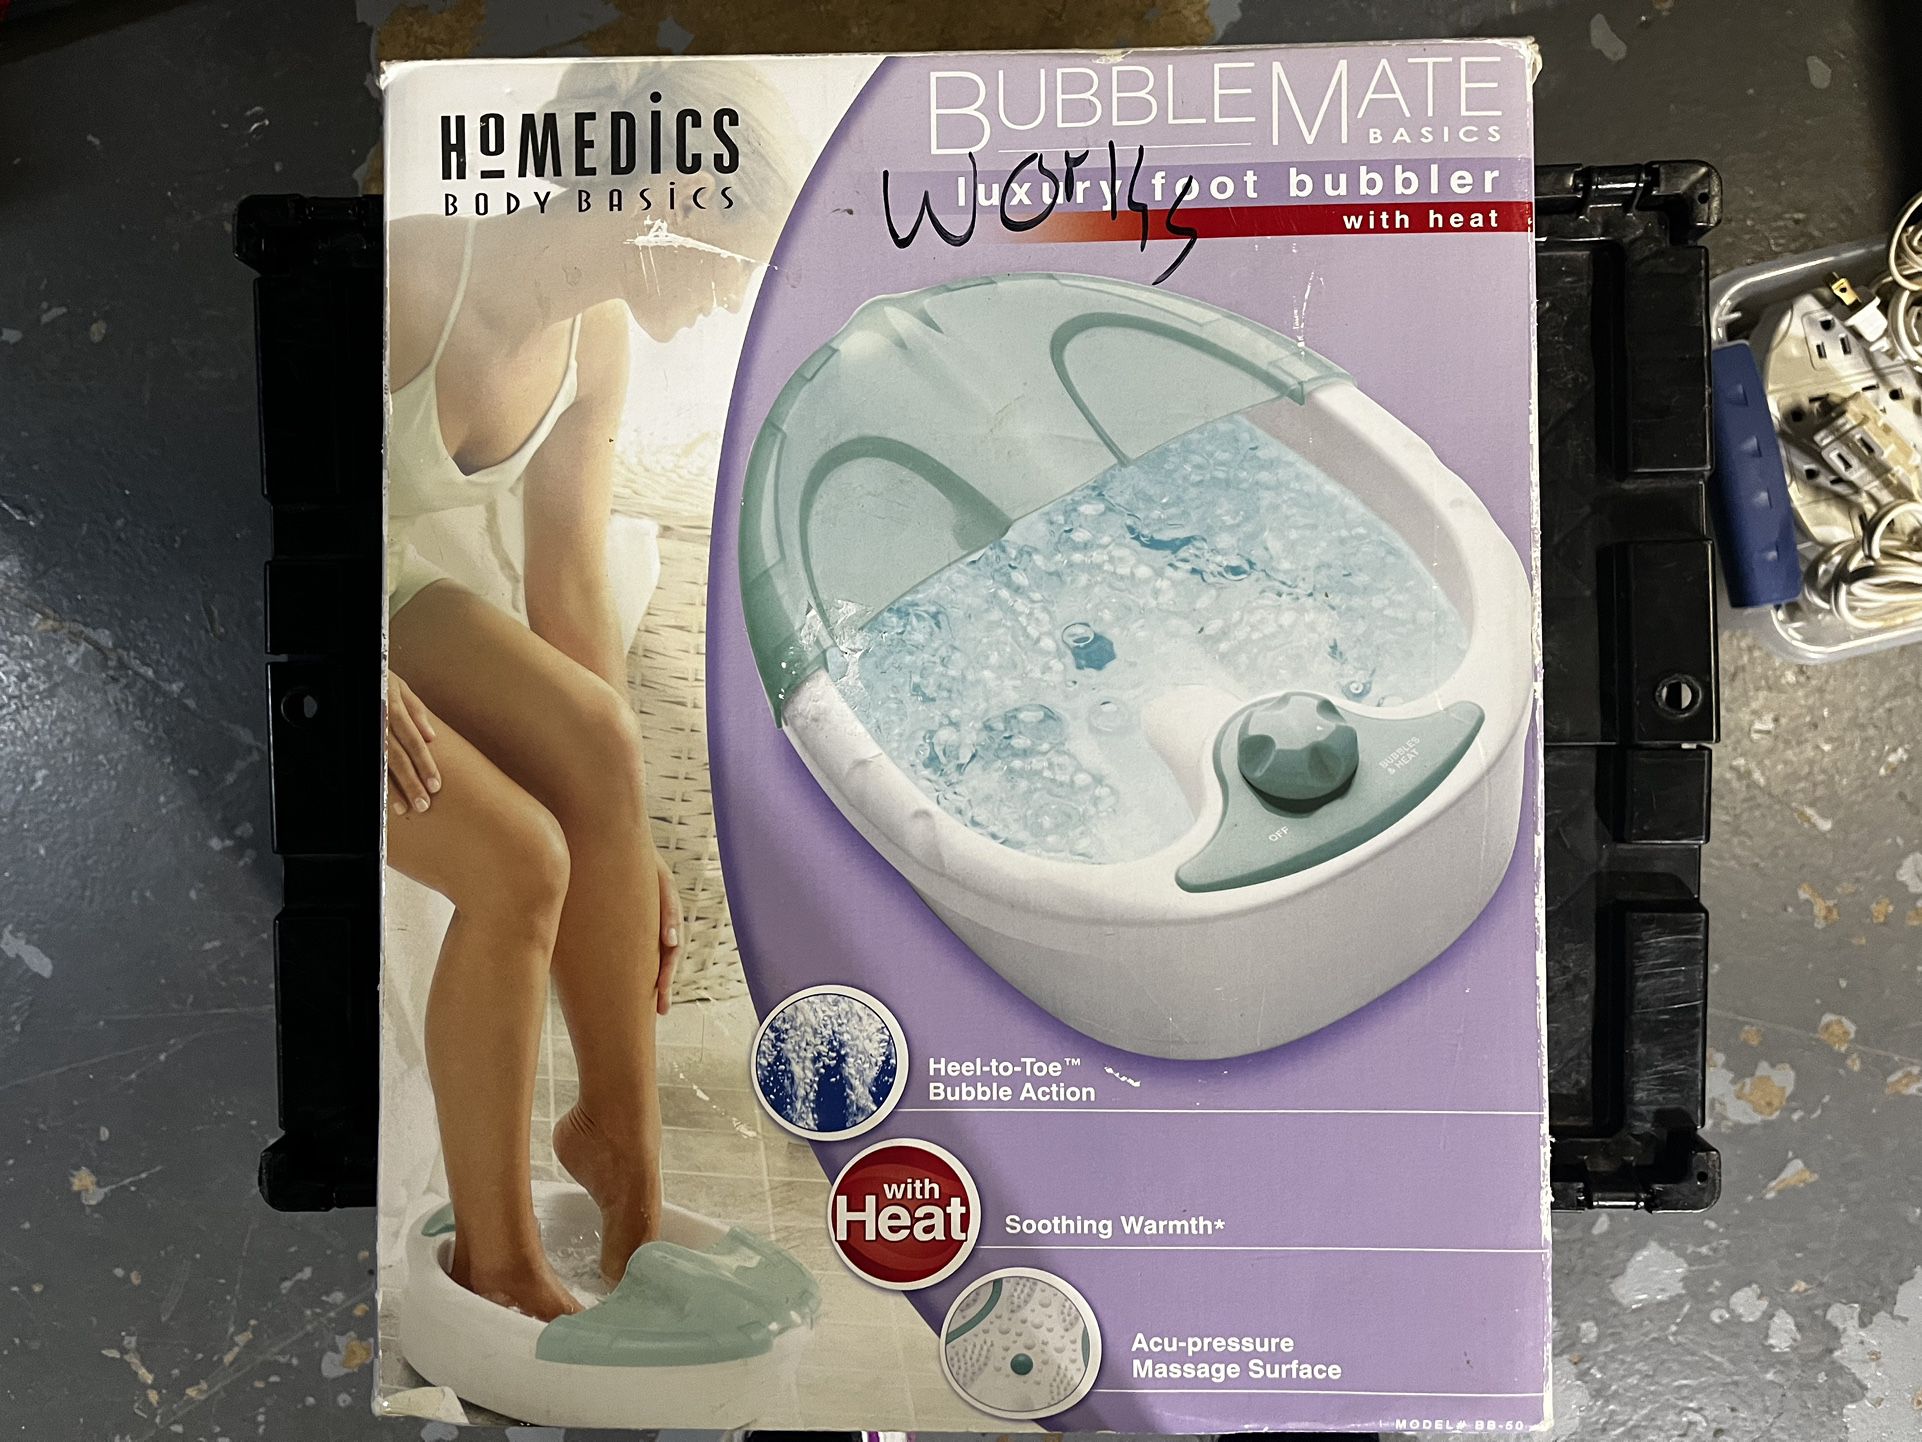 Homedics BubbleMate Luxury Foot Bubbler With Heat